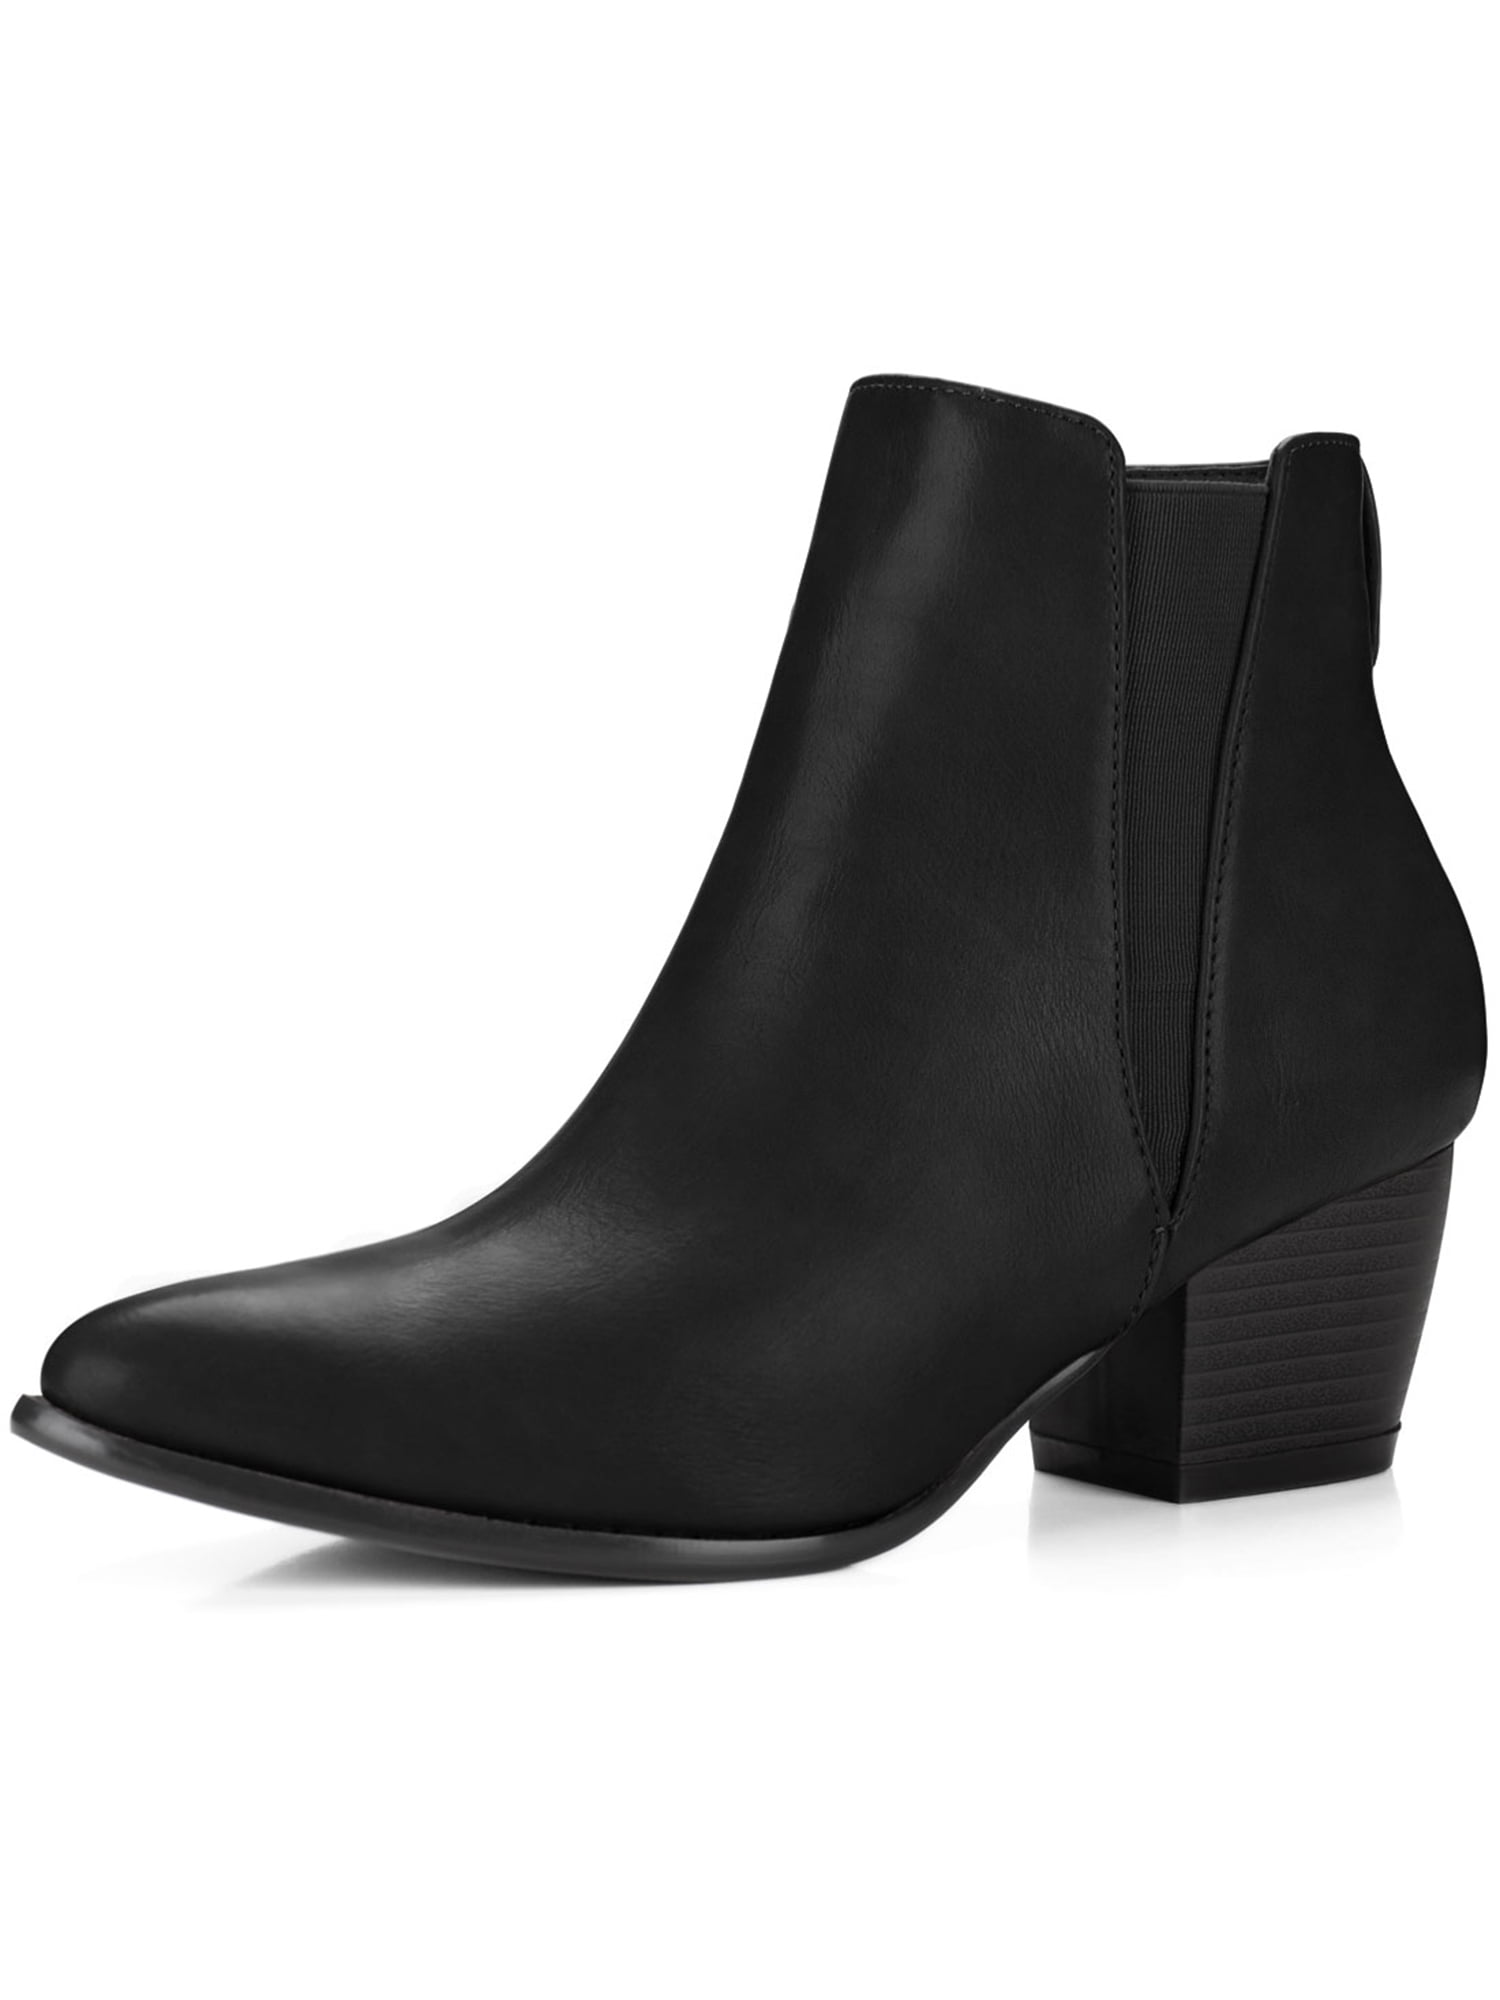 black pointed toe chelsea boots